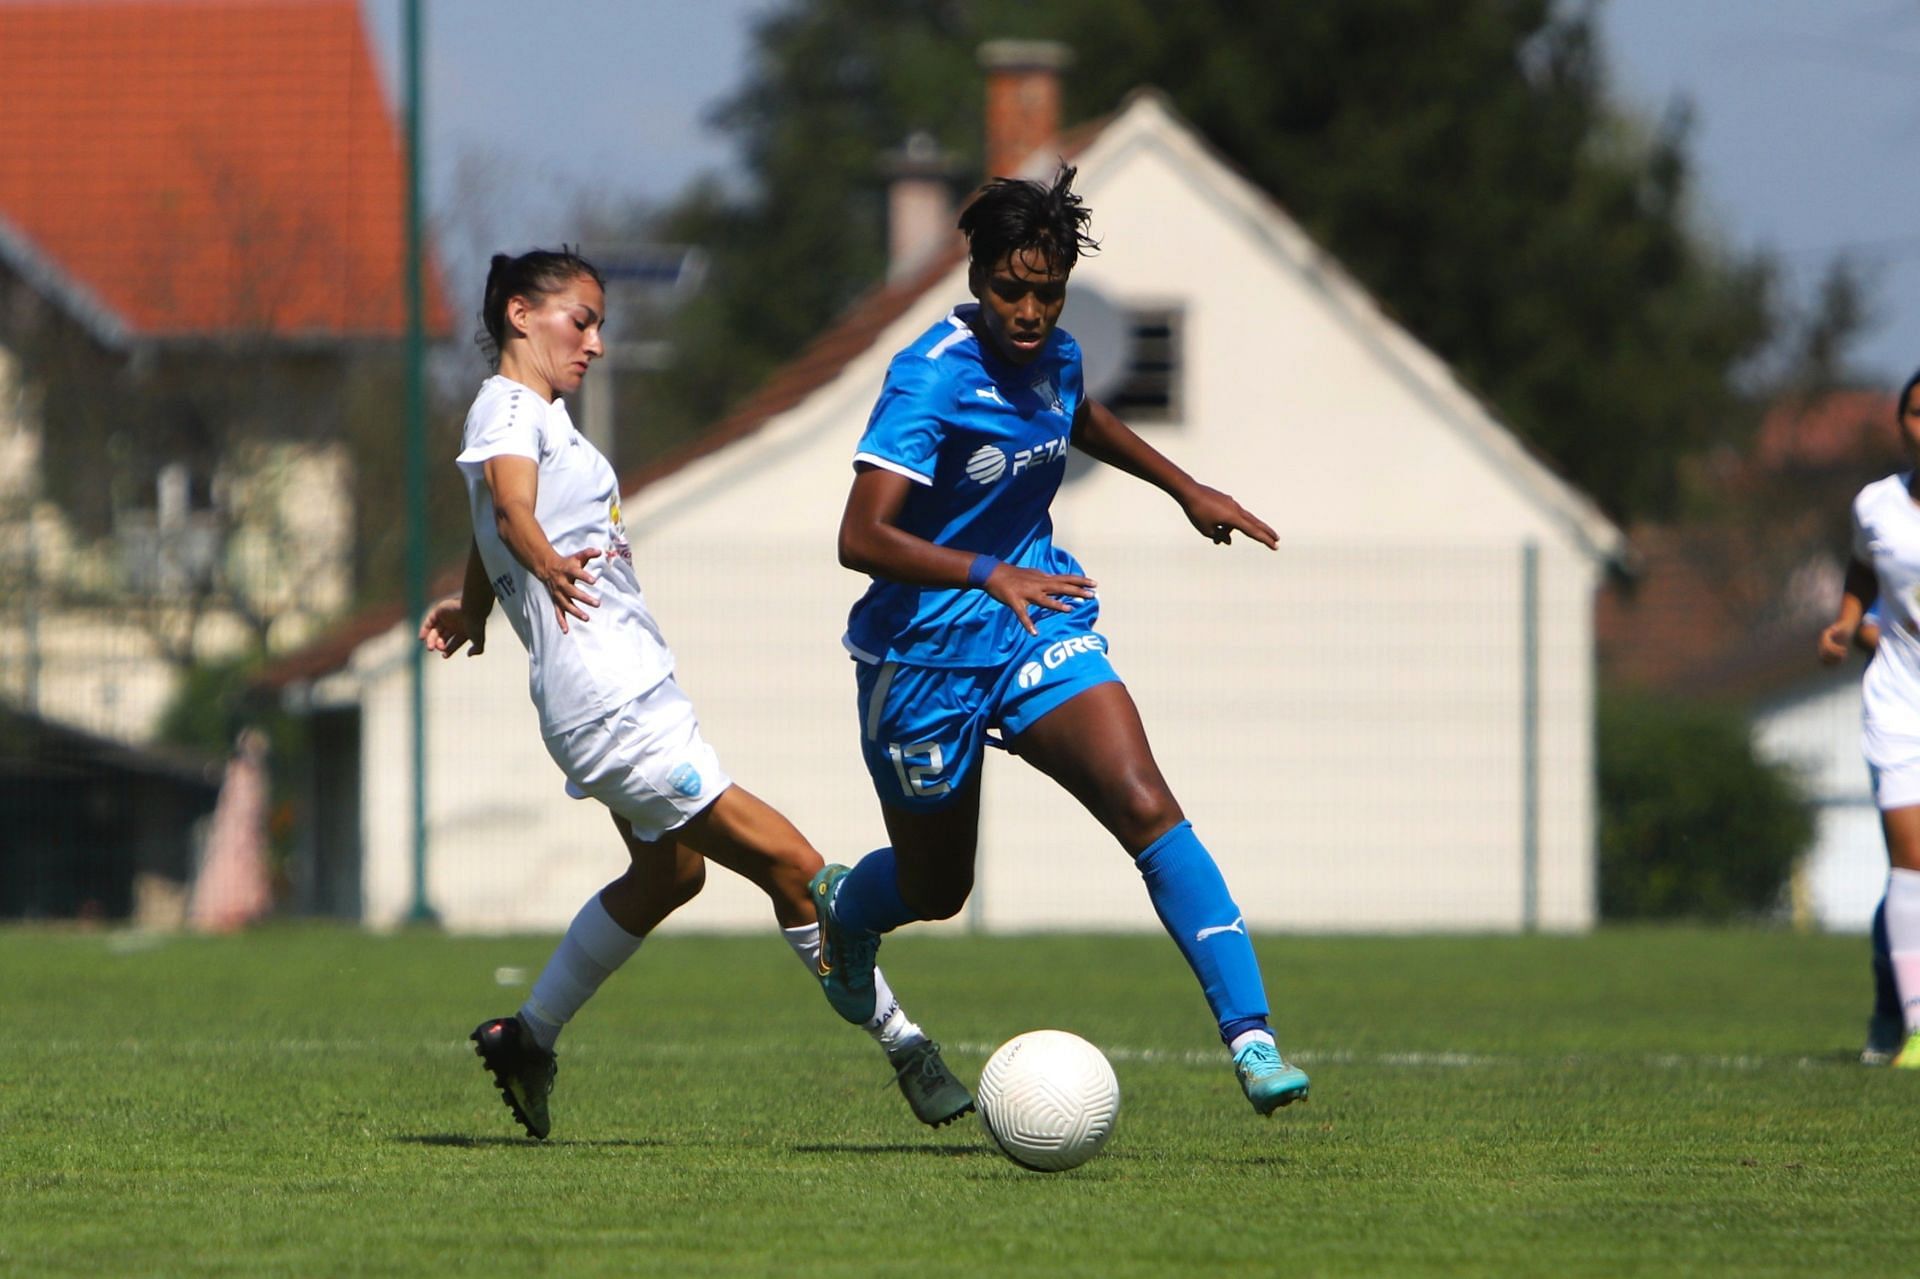 Manisha Kalyan helped her team Apollon Ladies FC to advance into the next stage of the UWCL Qualifiers. (Image - X)